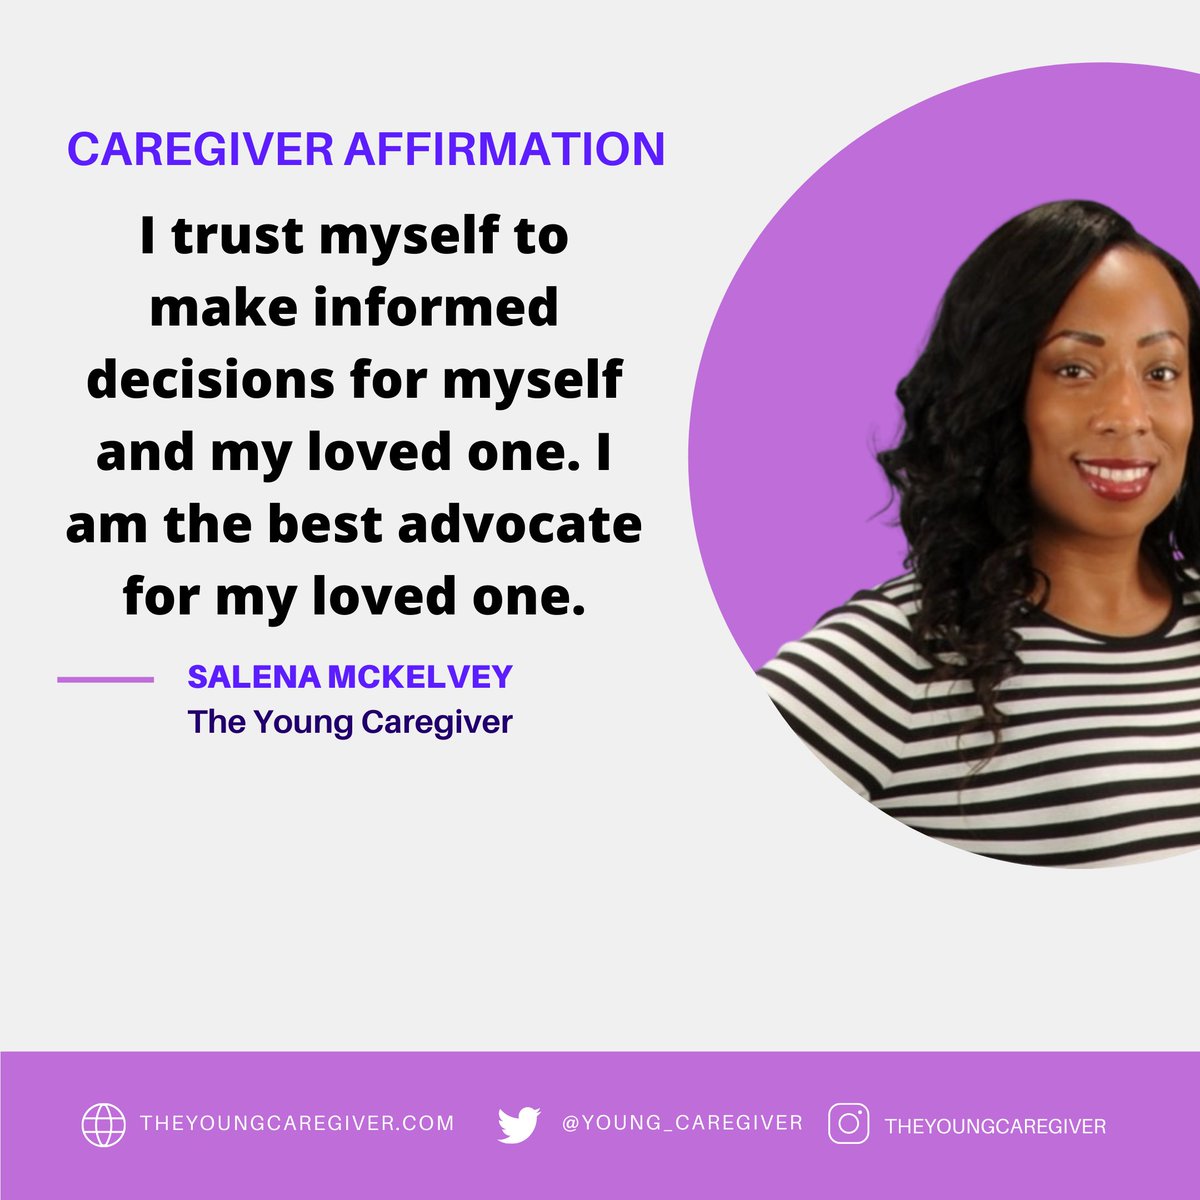 Research and ask questions so you are comfortable with your decisions. Use all of your resources and don't be afraid to ask questions. #theyoungcaregiver #caregiver #selflove #selfcare #caregiveraffirmations